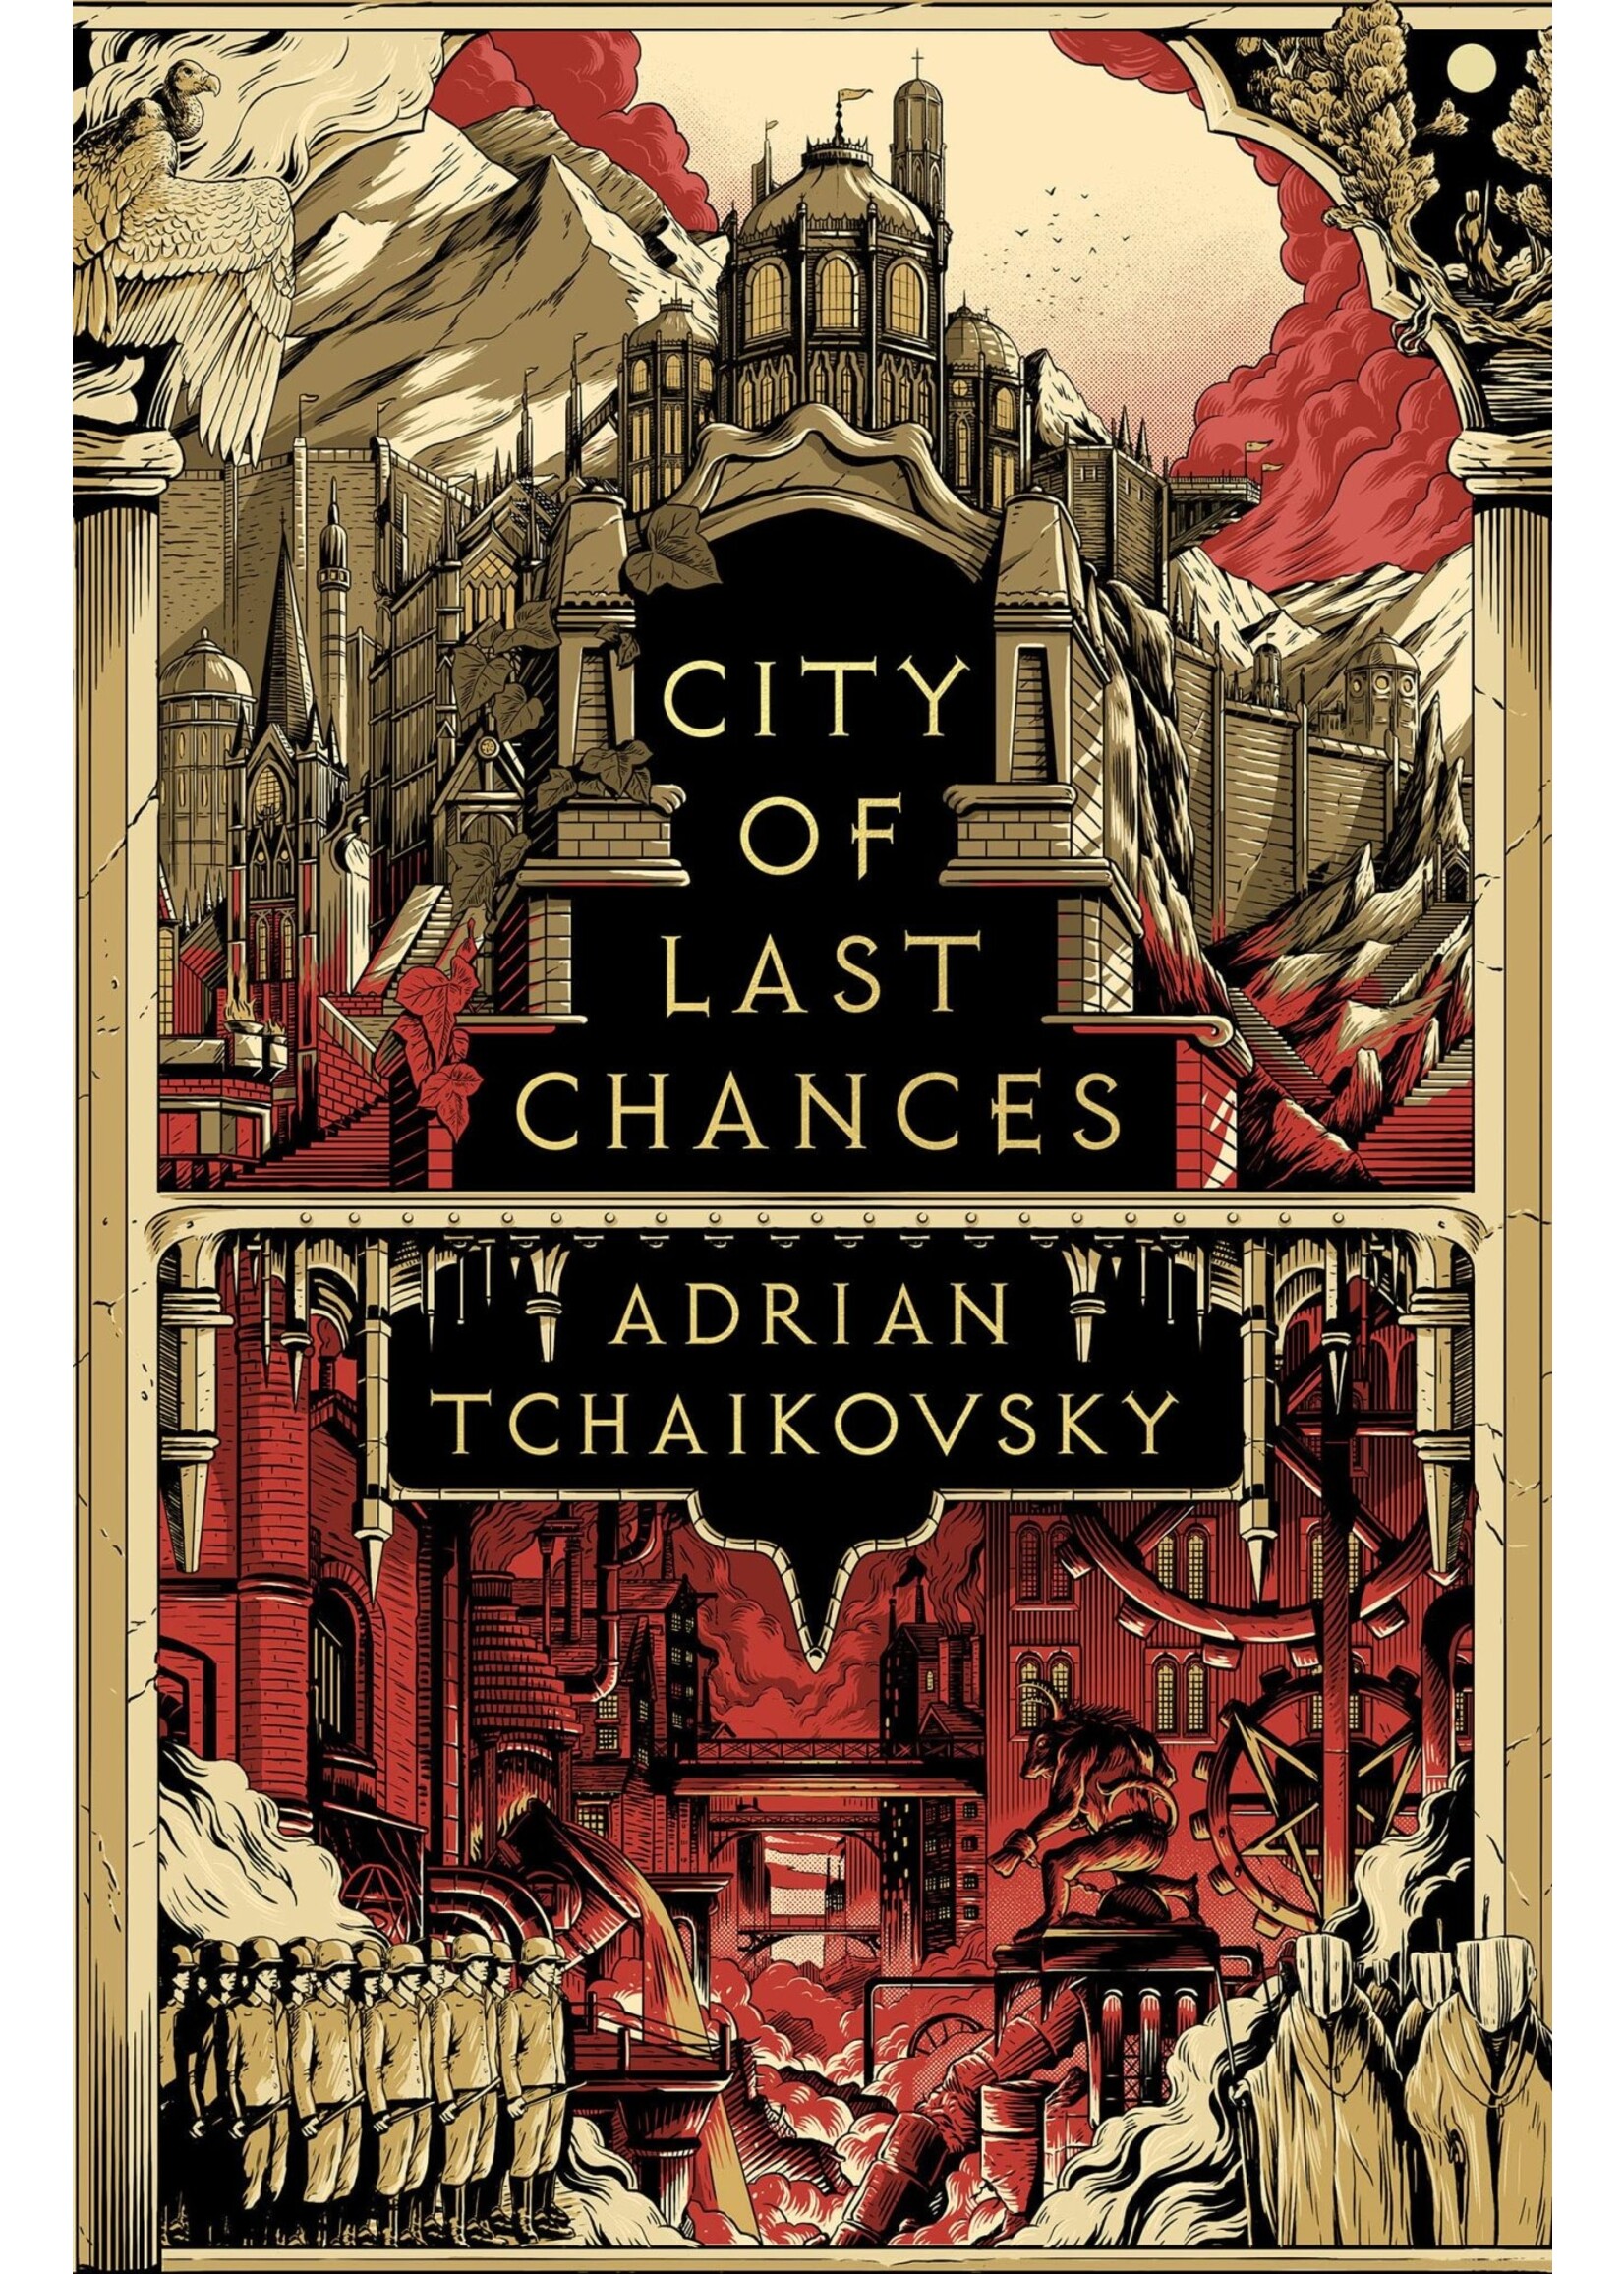 City of Last Chances (The Tyrant Philosophers #1) by Adrian Tchaikovsky